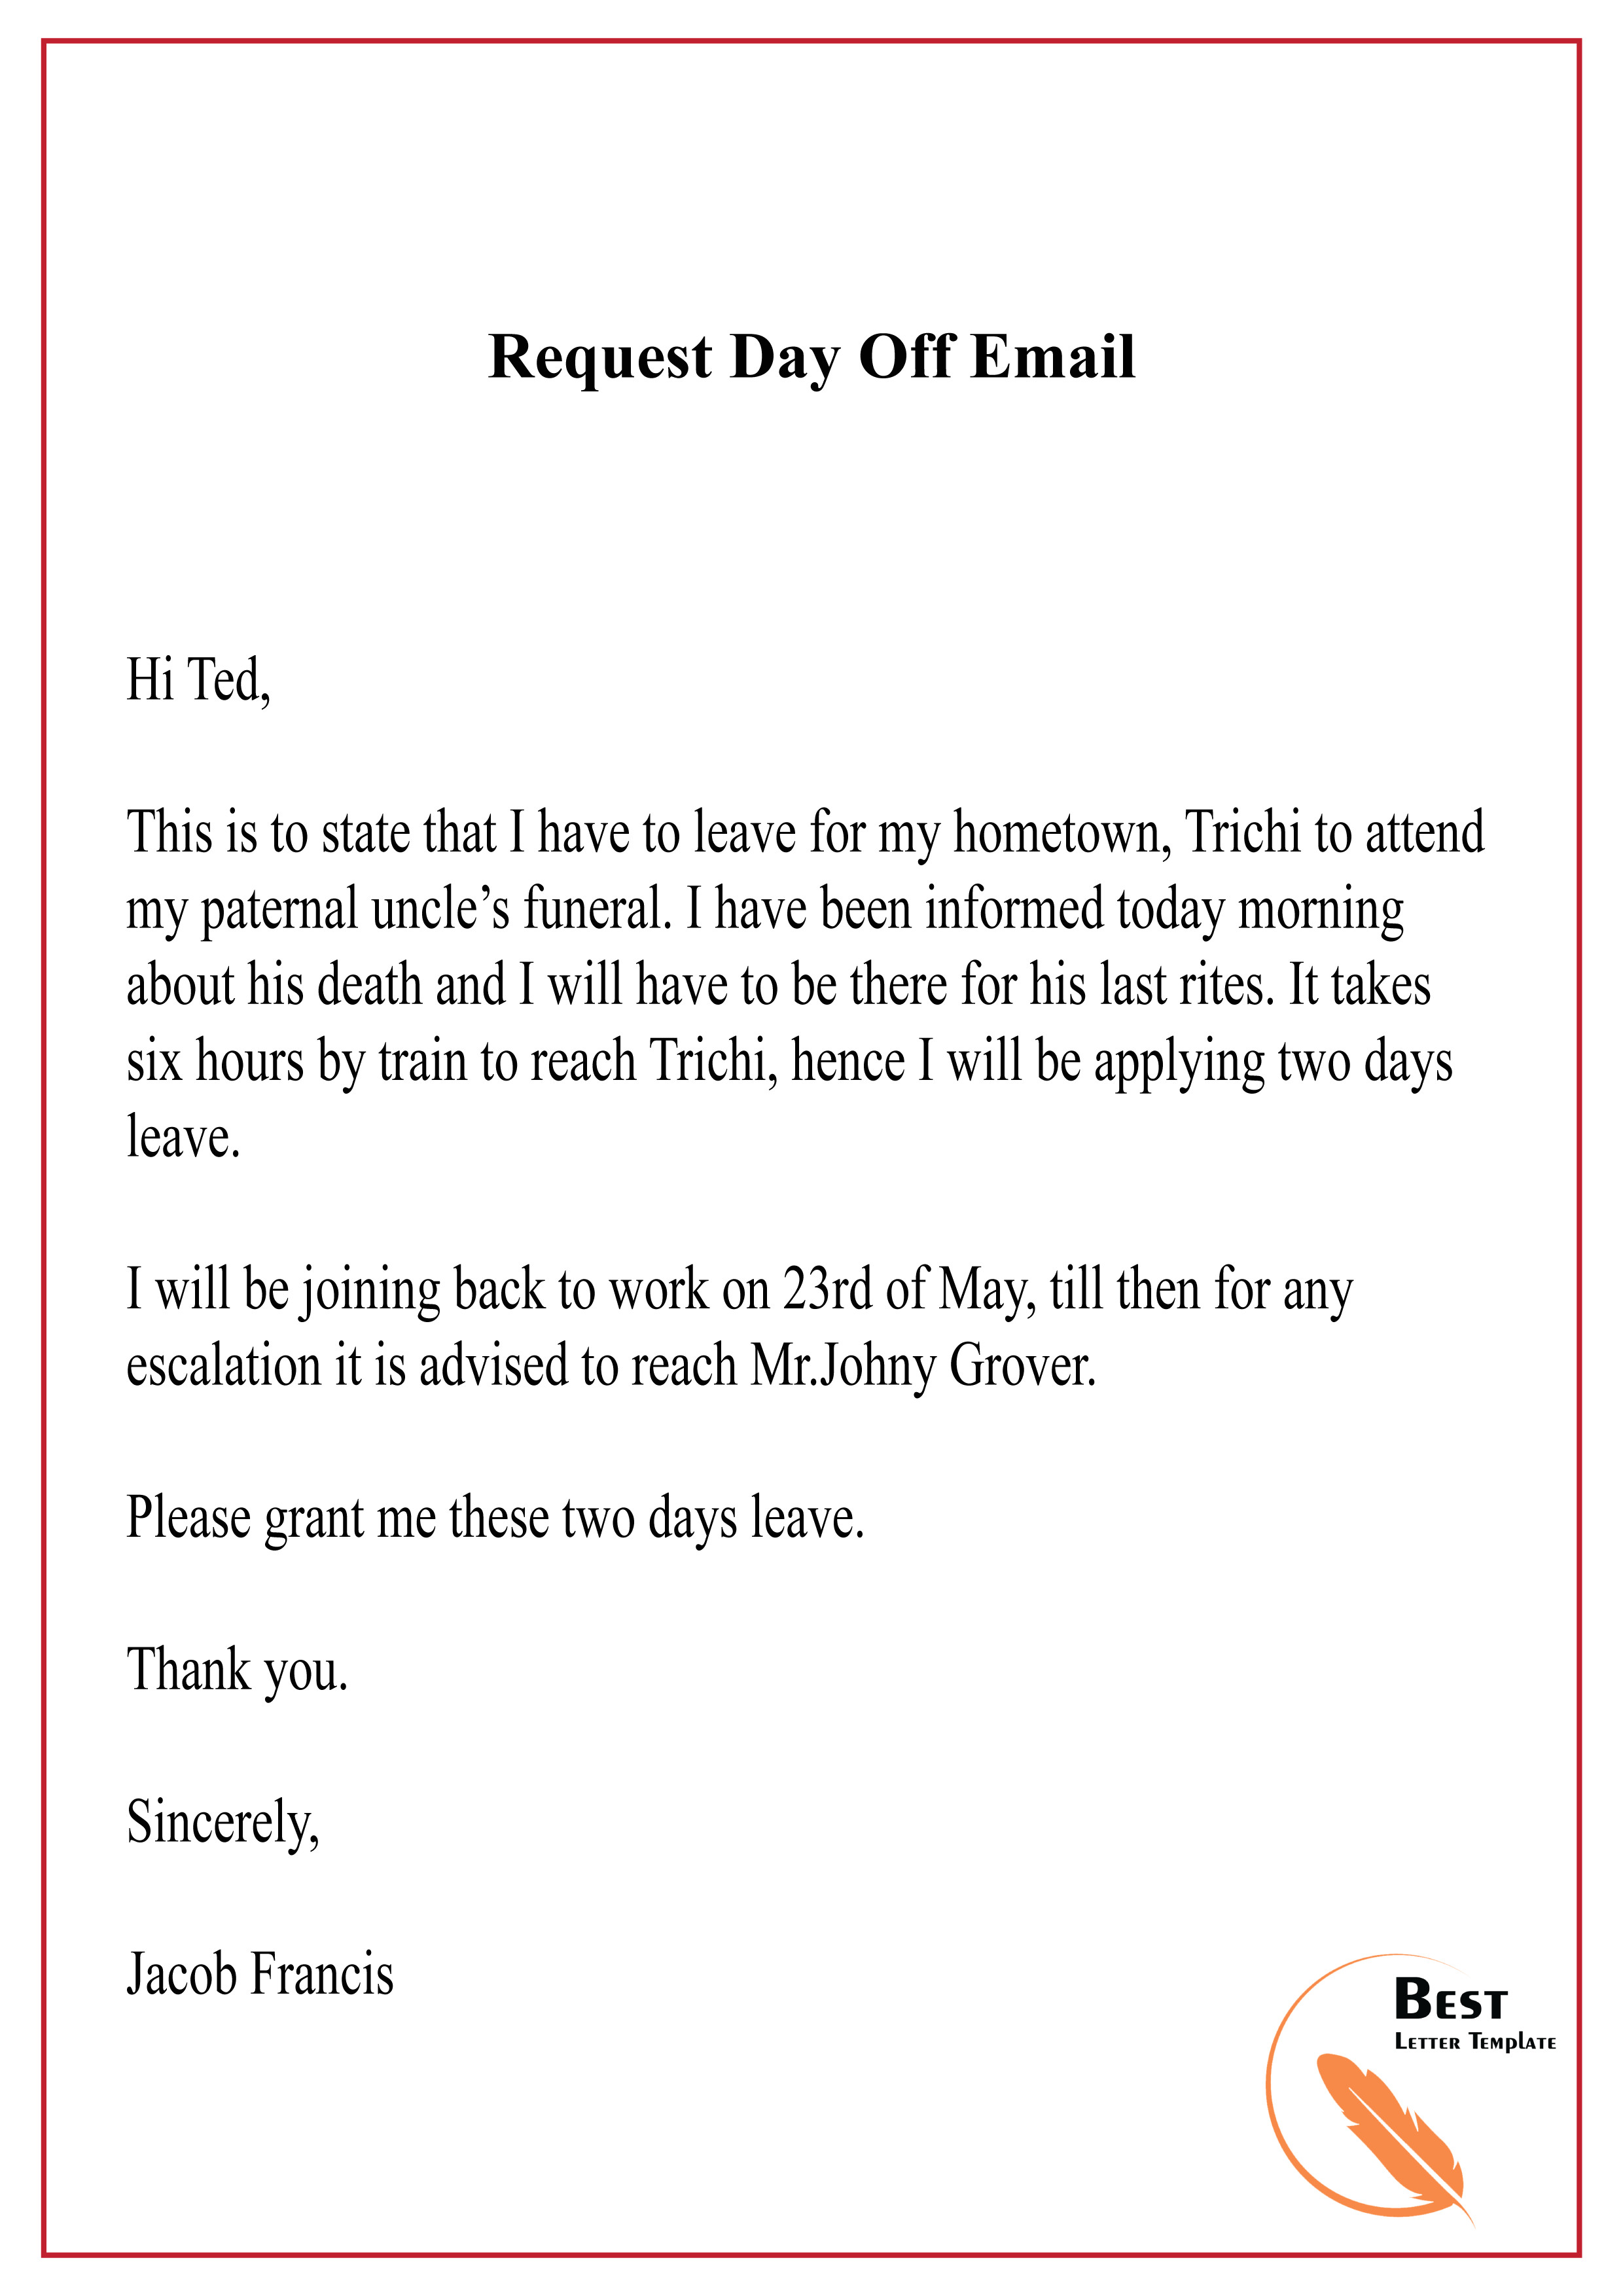 request day off email 01